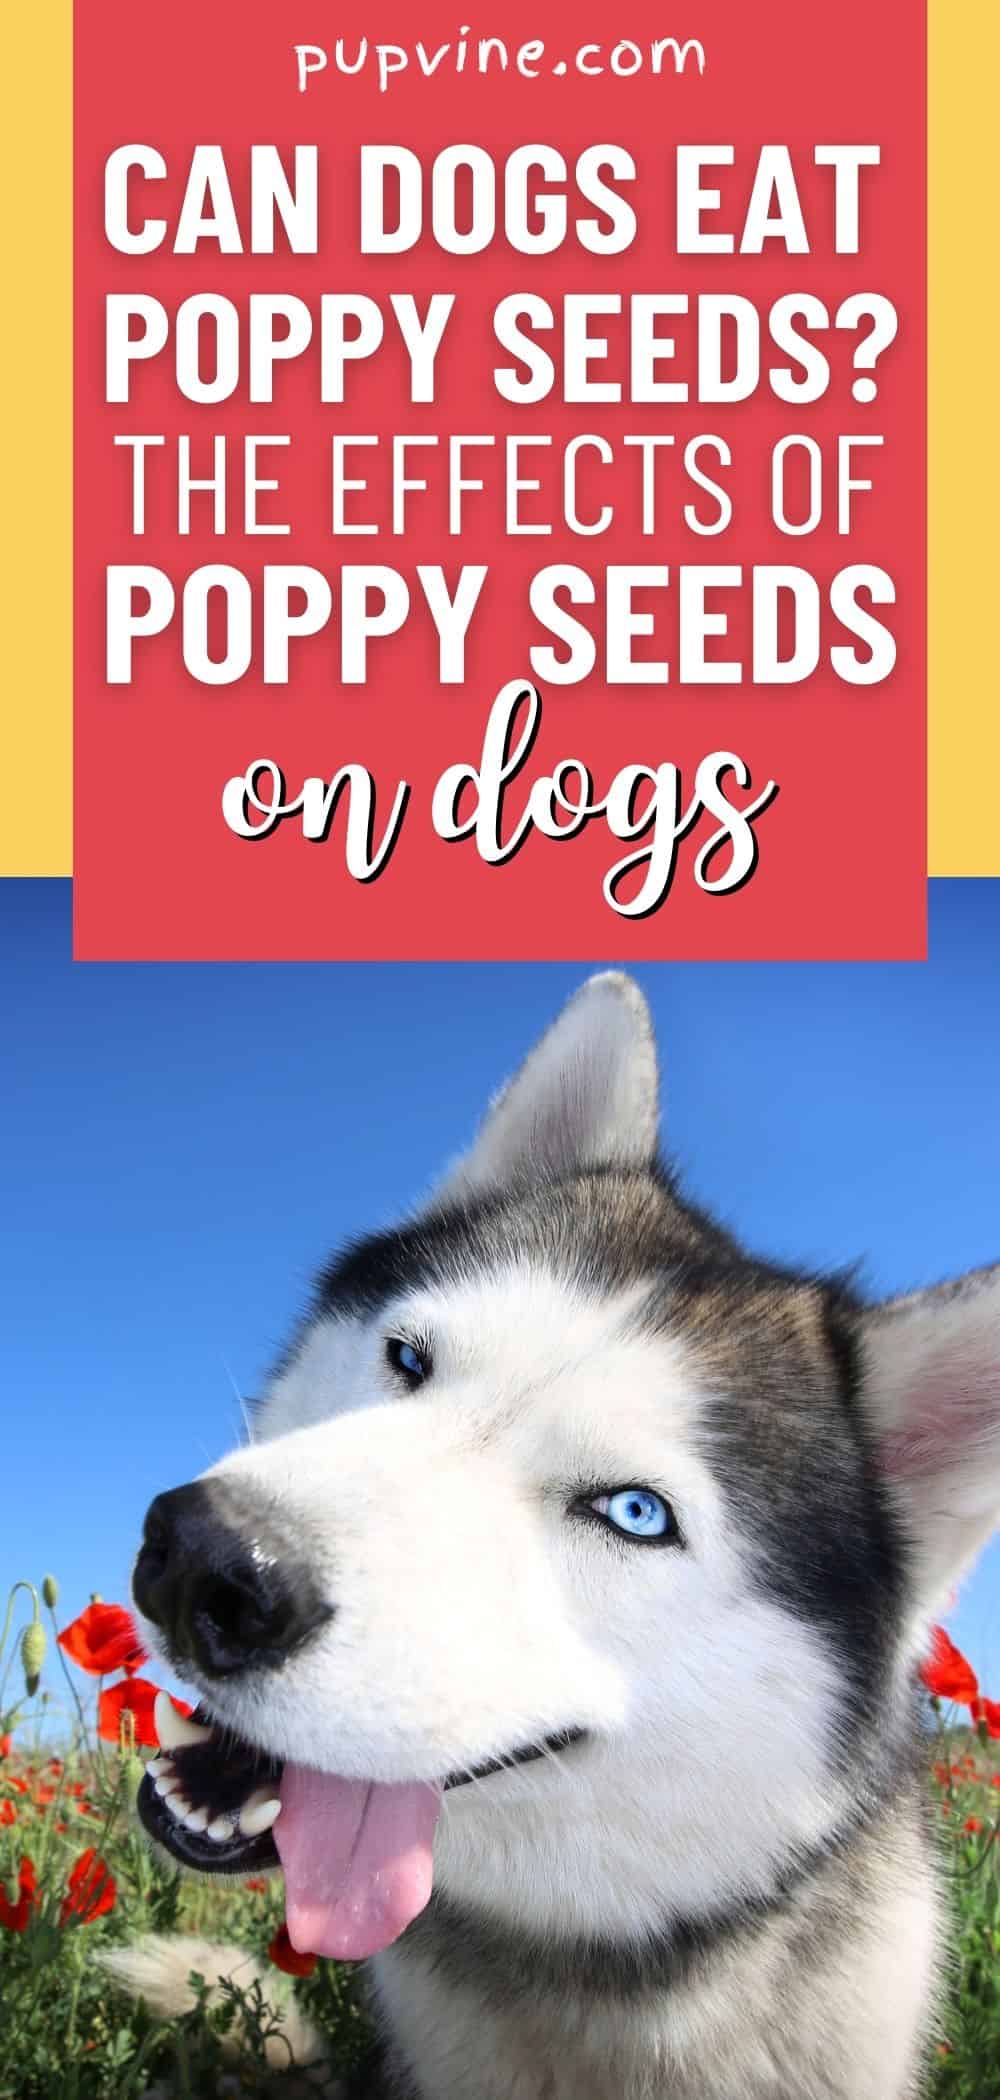 Can Dogs Eat Poppy Seeds? The Effects Of Poppy Seeds On Dogs